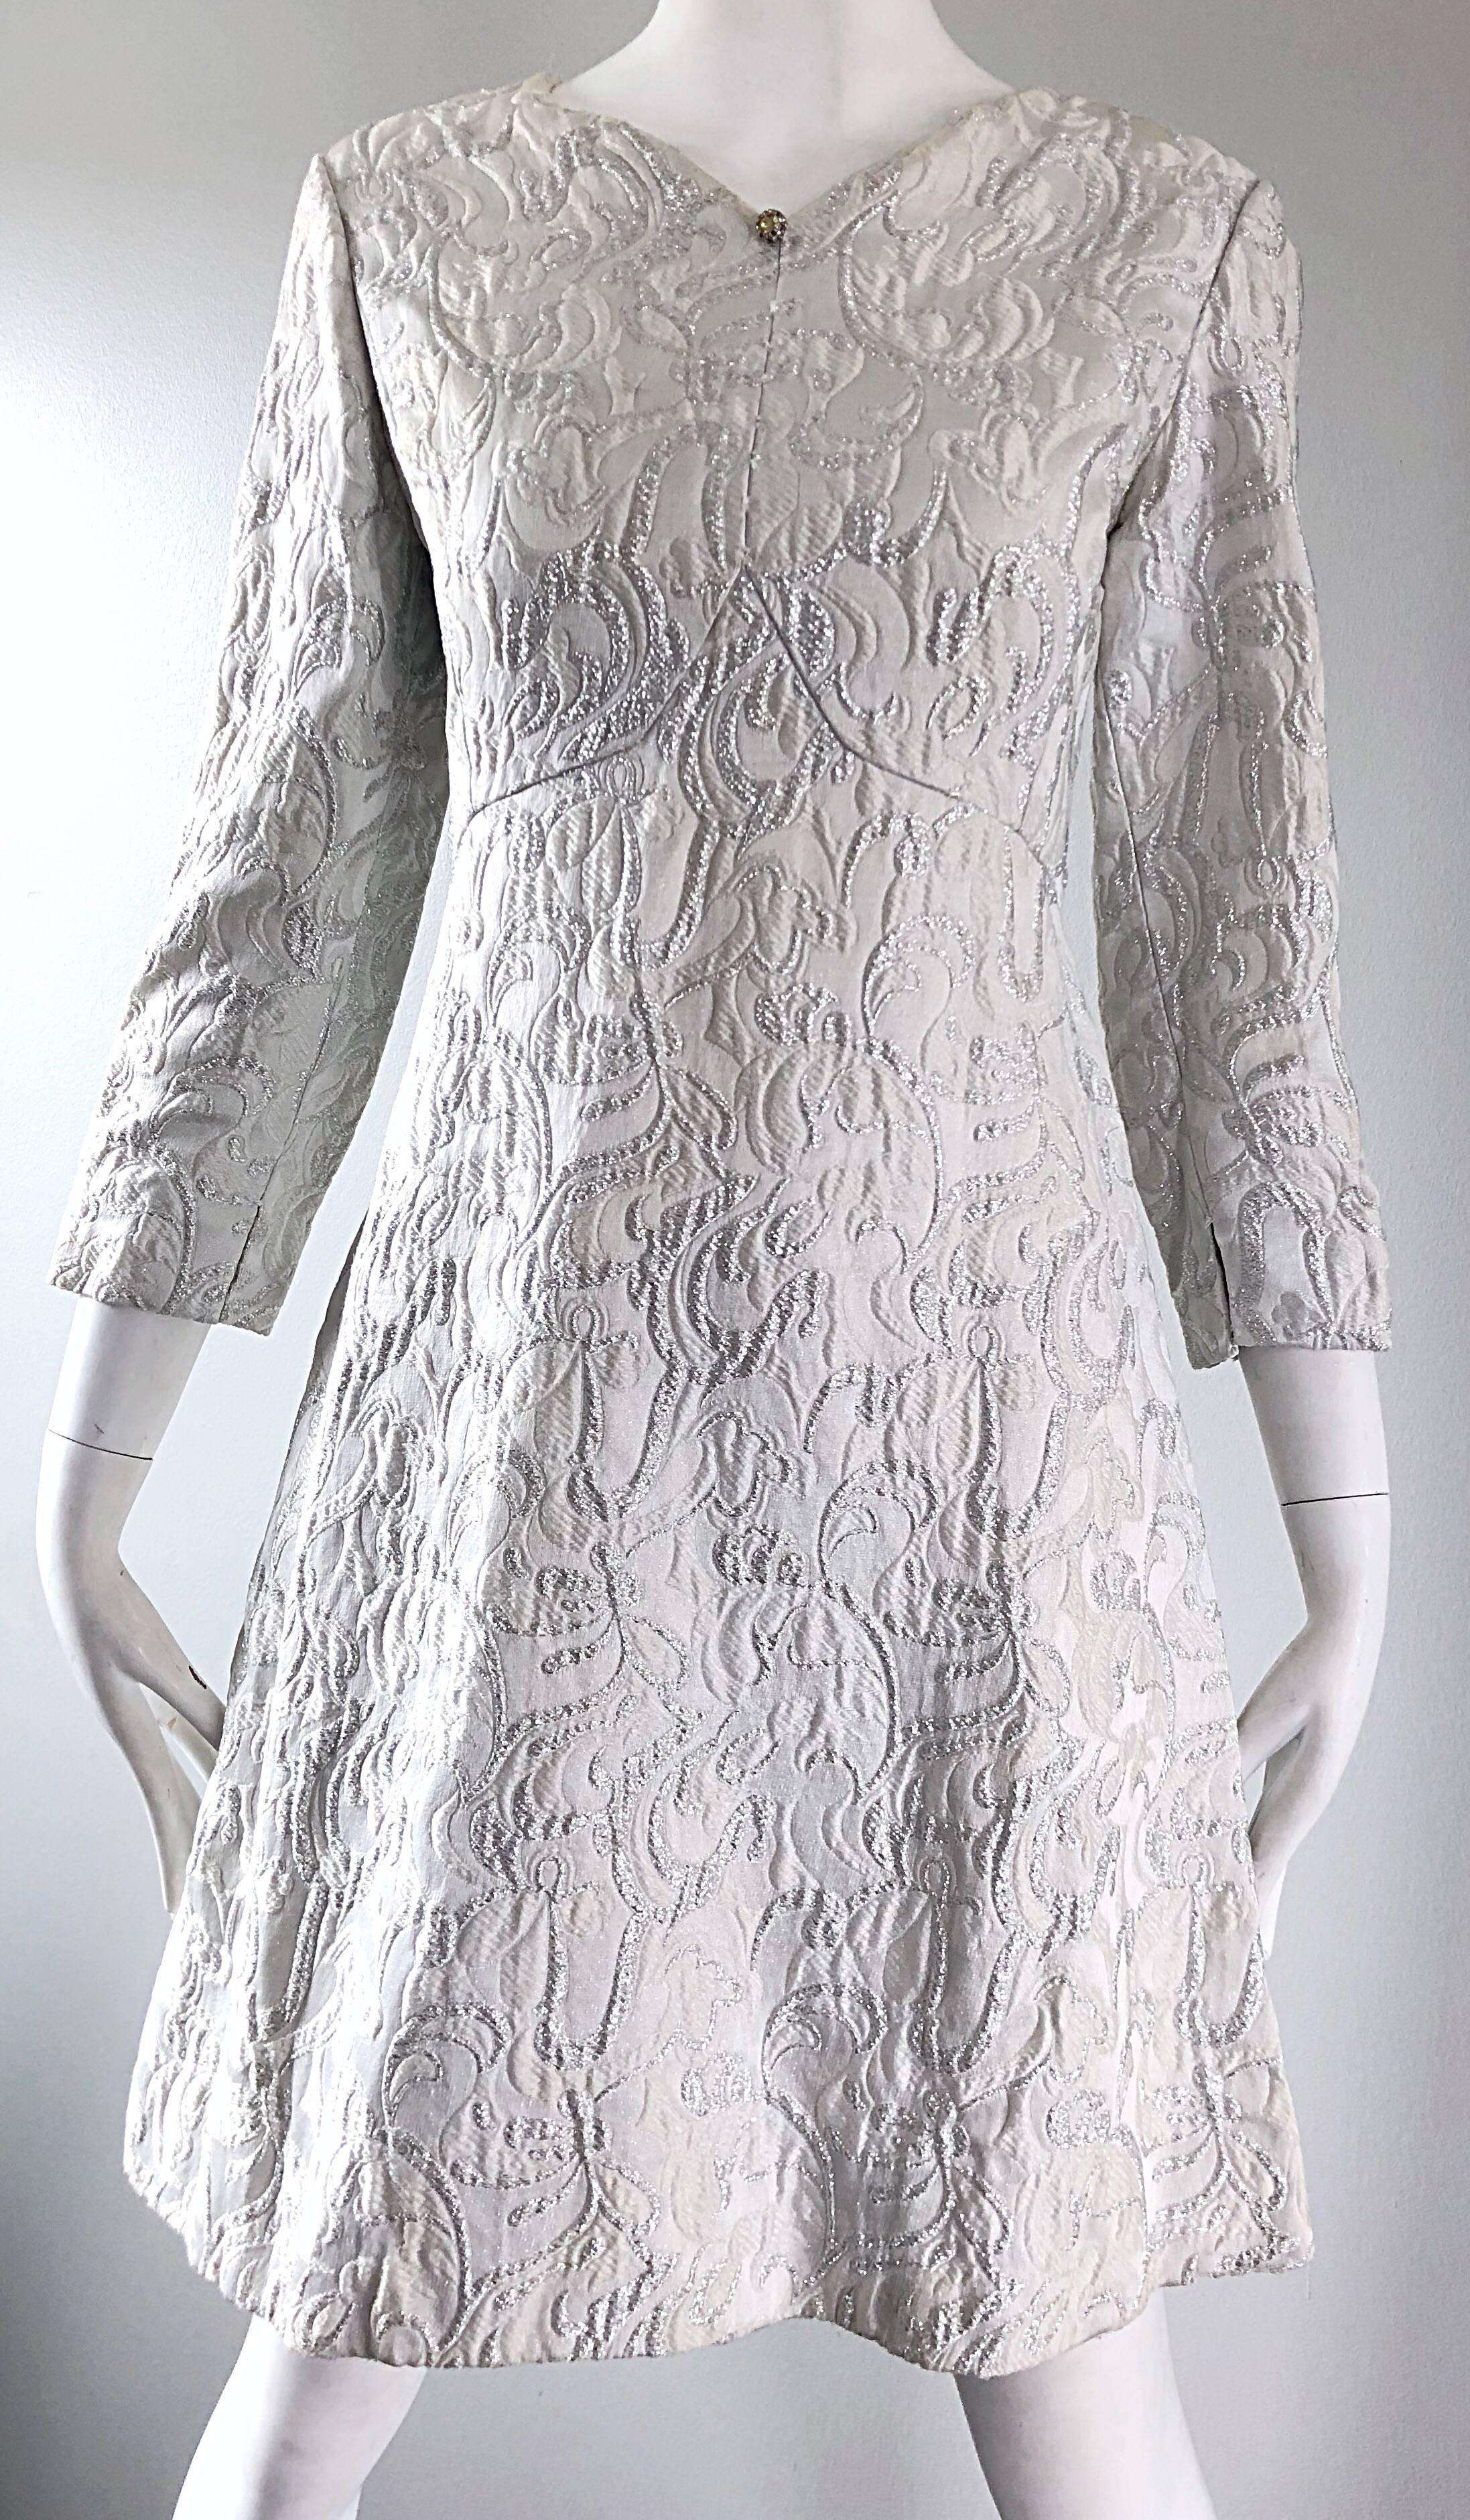 Documented Ceil Chapman 1960s silk brocade silver and white A-Line dress 6